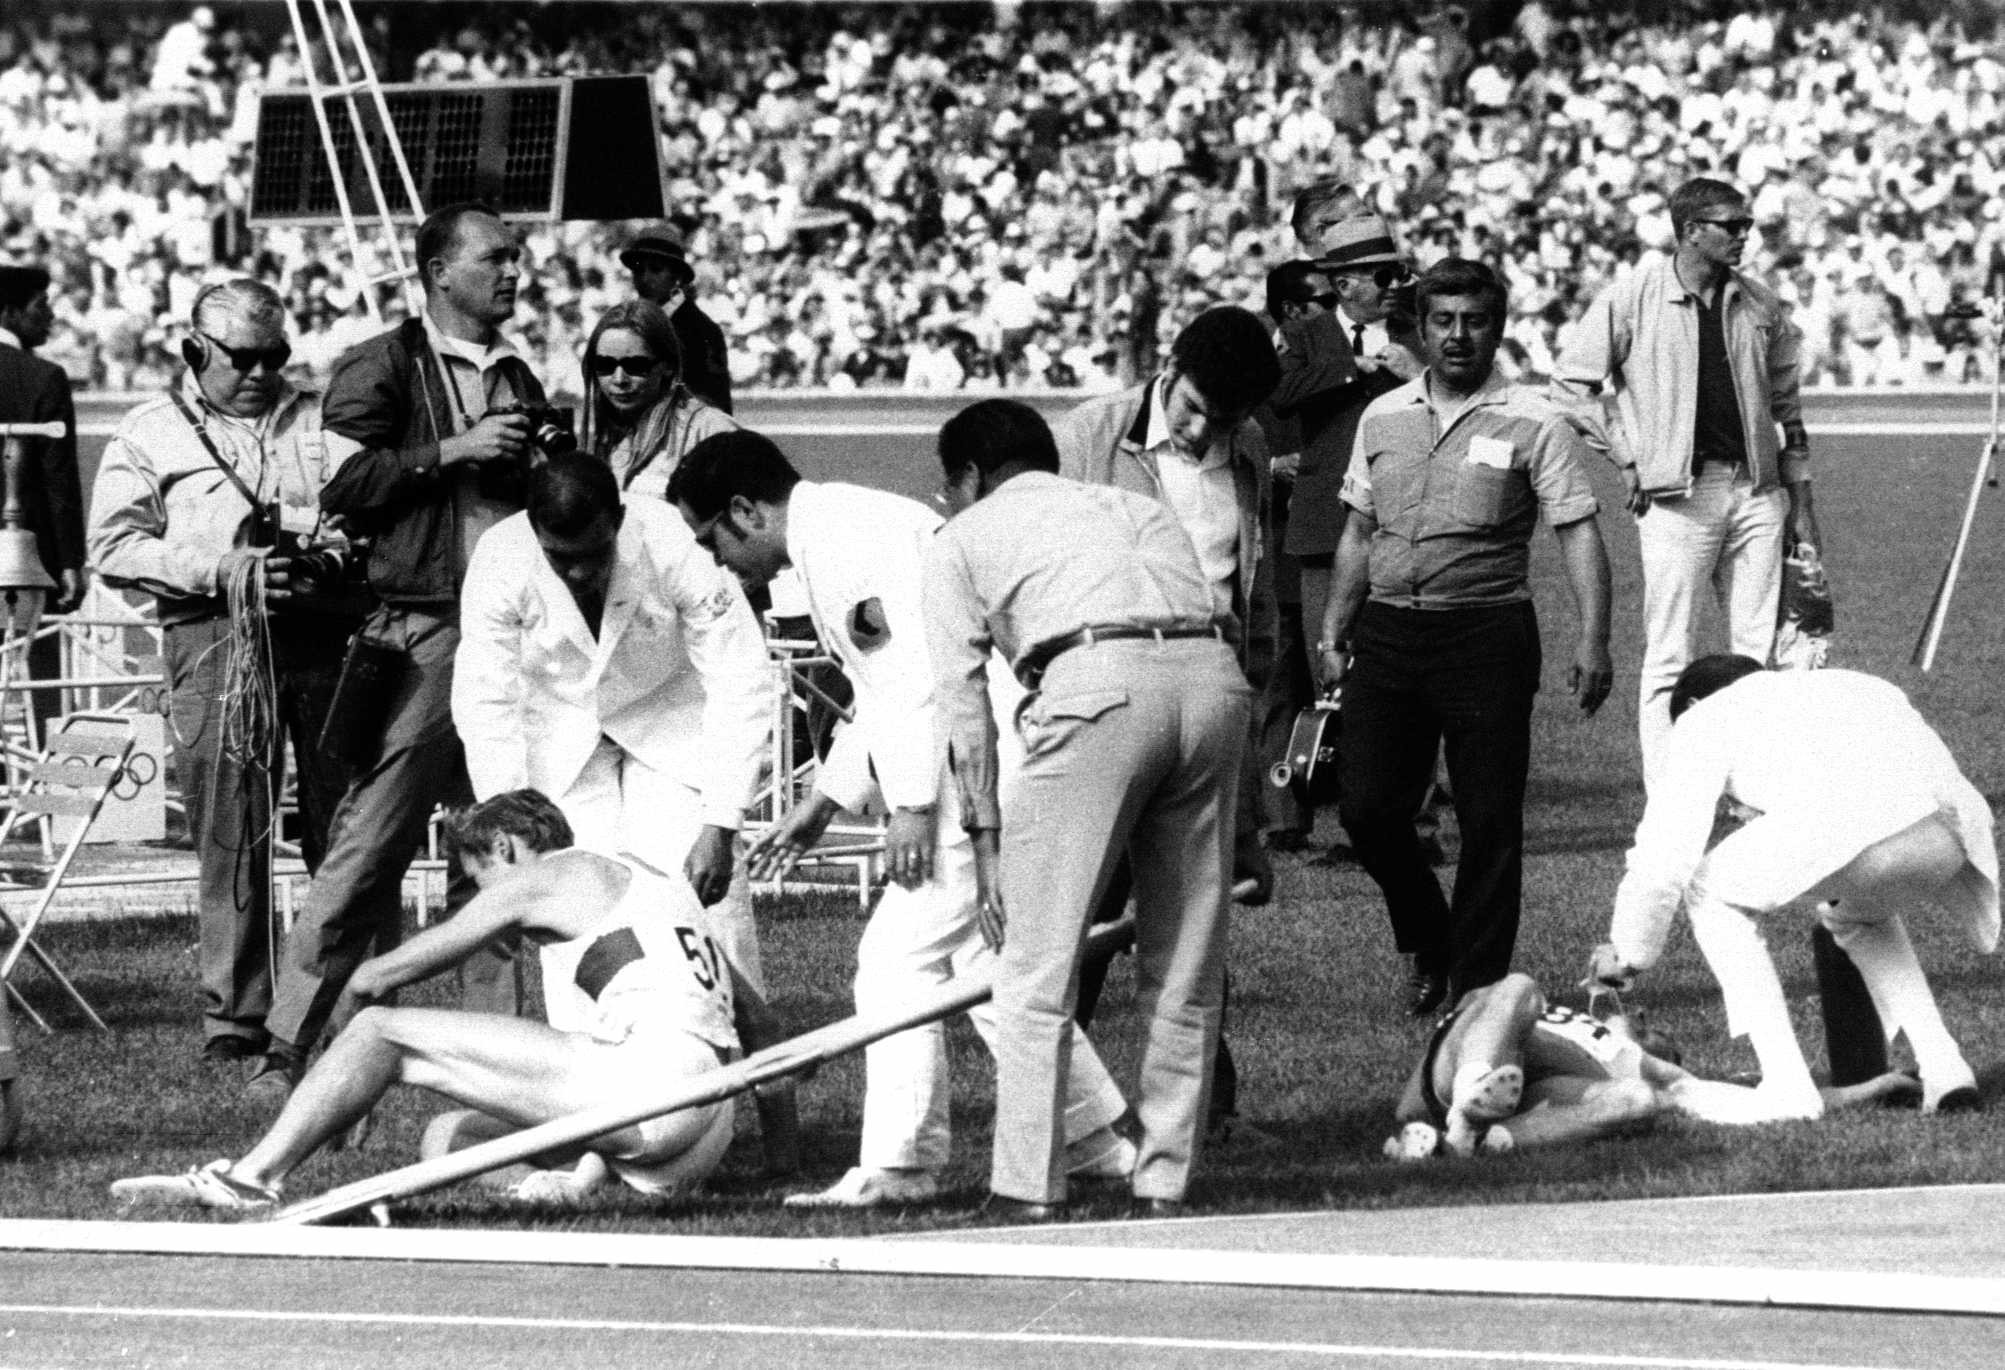 Many athletes required medical help after racing at altitude during the 1968 Mexico Olympics ©Getty Images